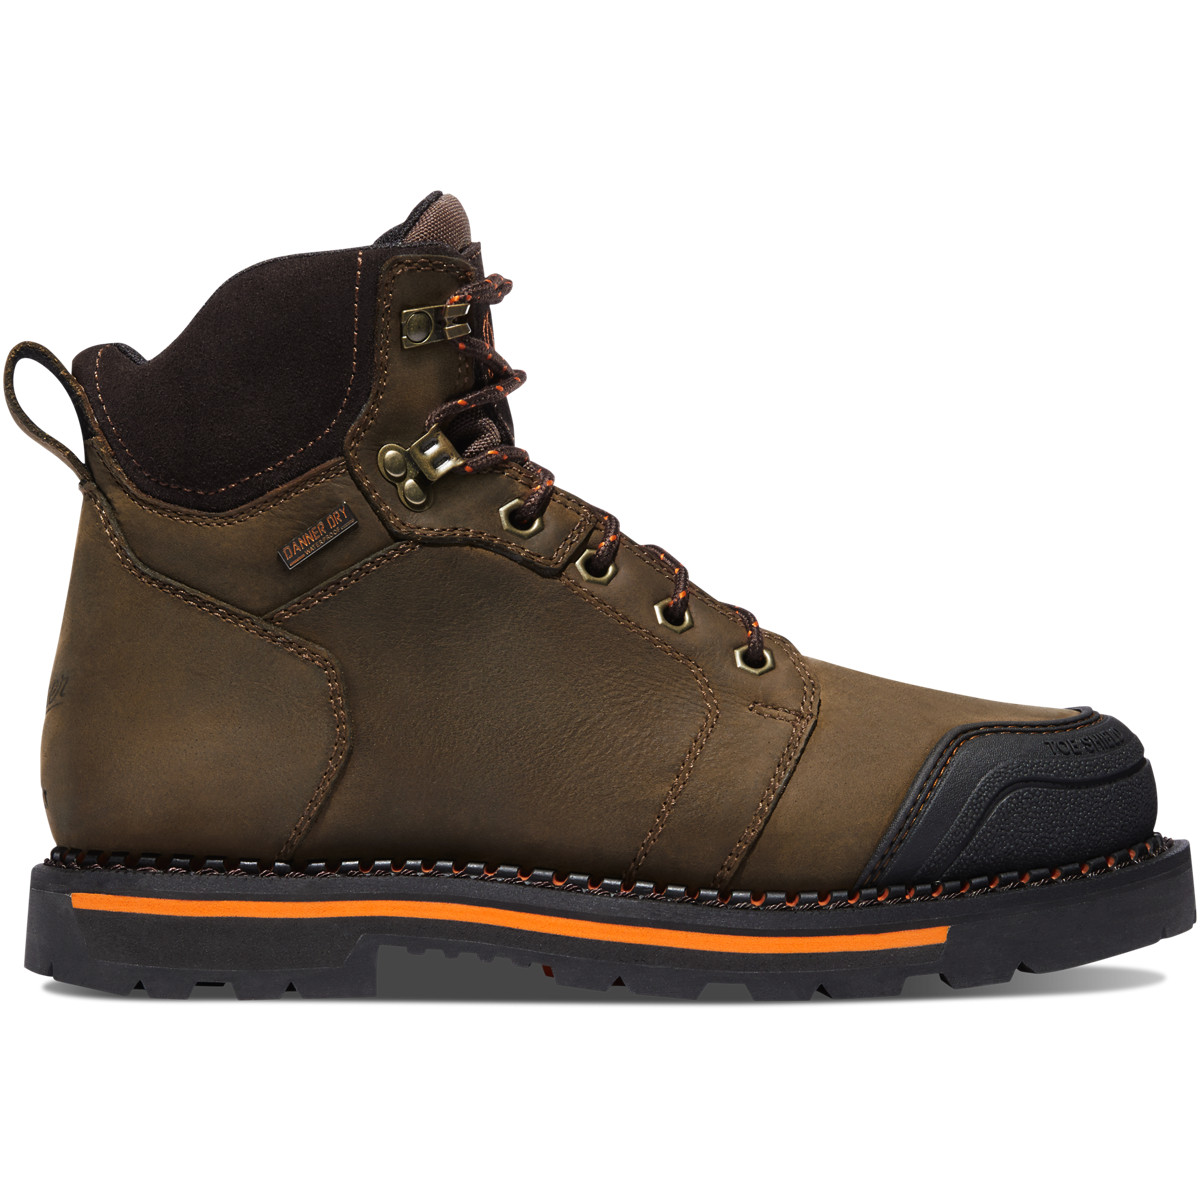 Danner Men's 14230 Gritstone 8" Brown 400G Insulated Comp Toe Work Safety Boots